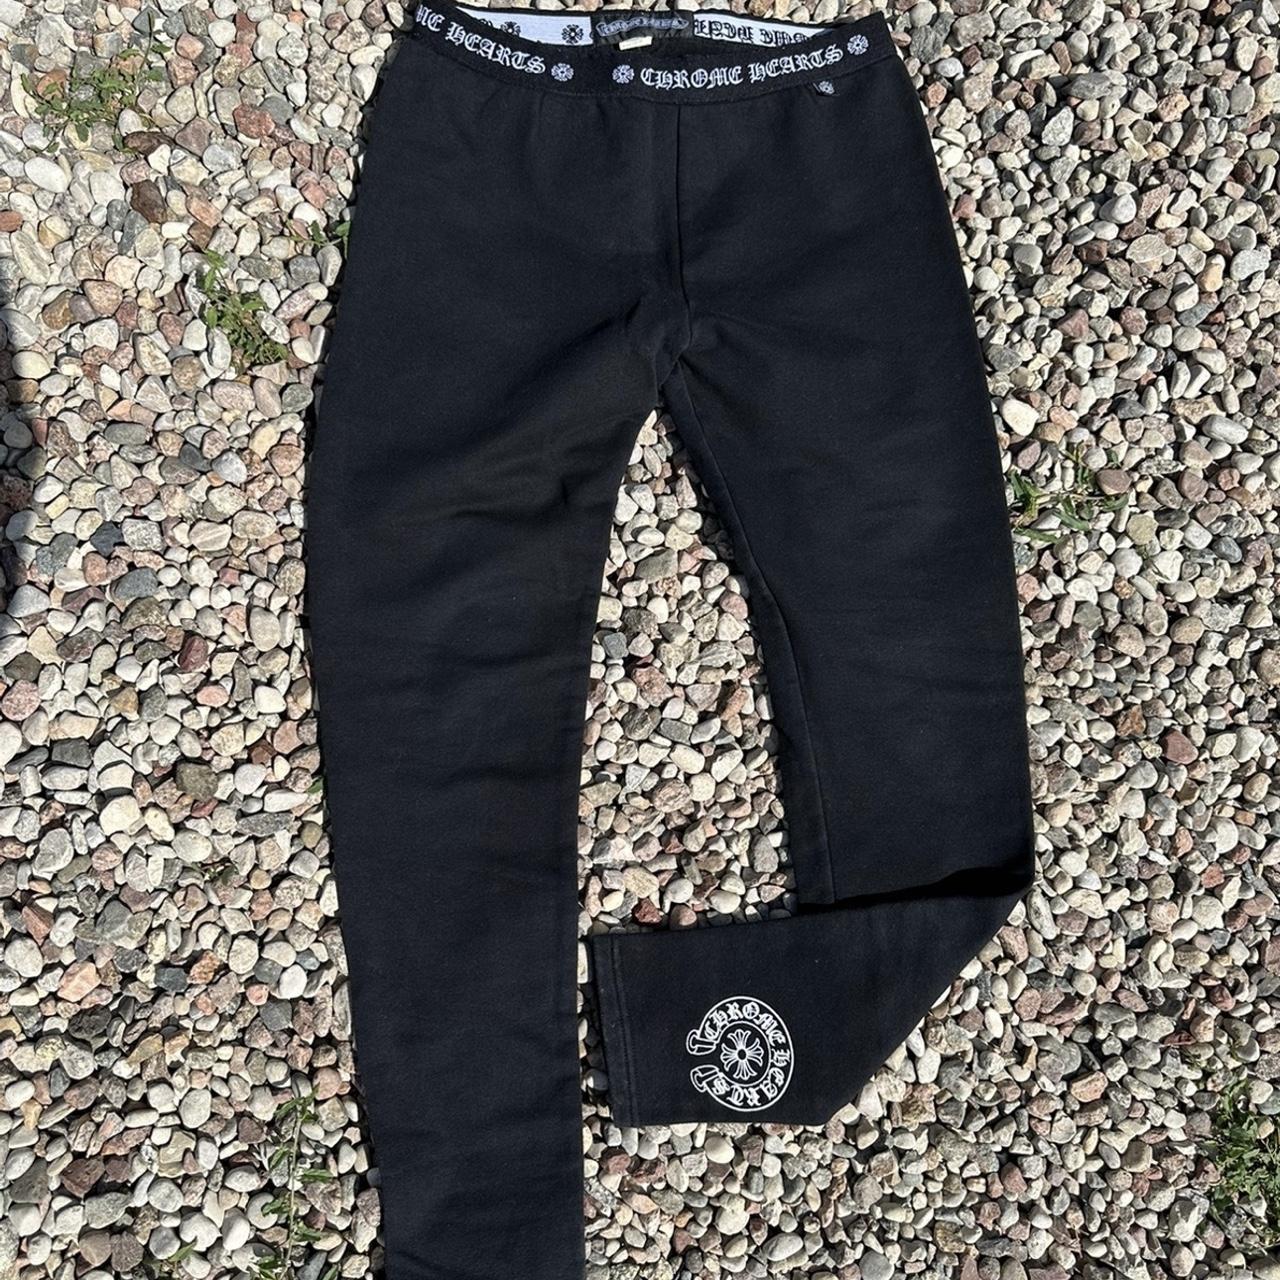 Chrome Hearts leggings size M Never worn, just tried - Depop